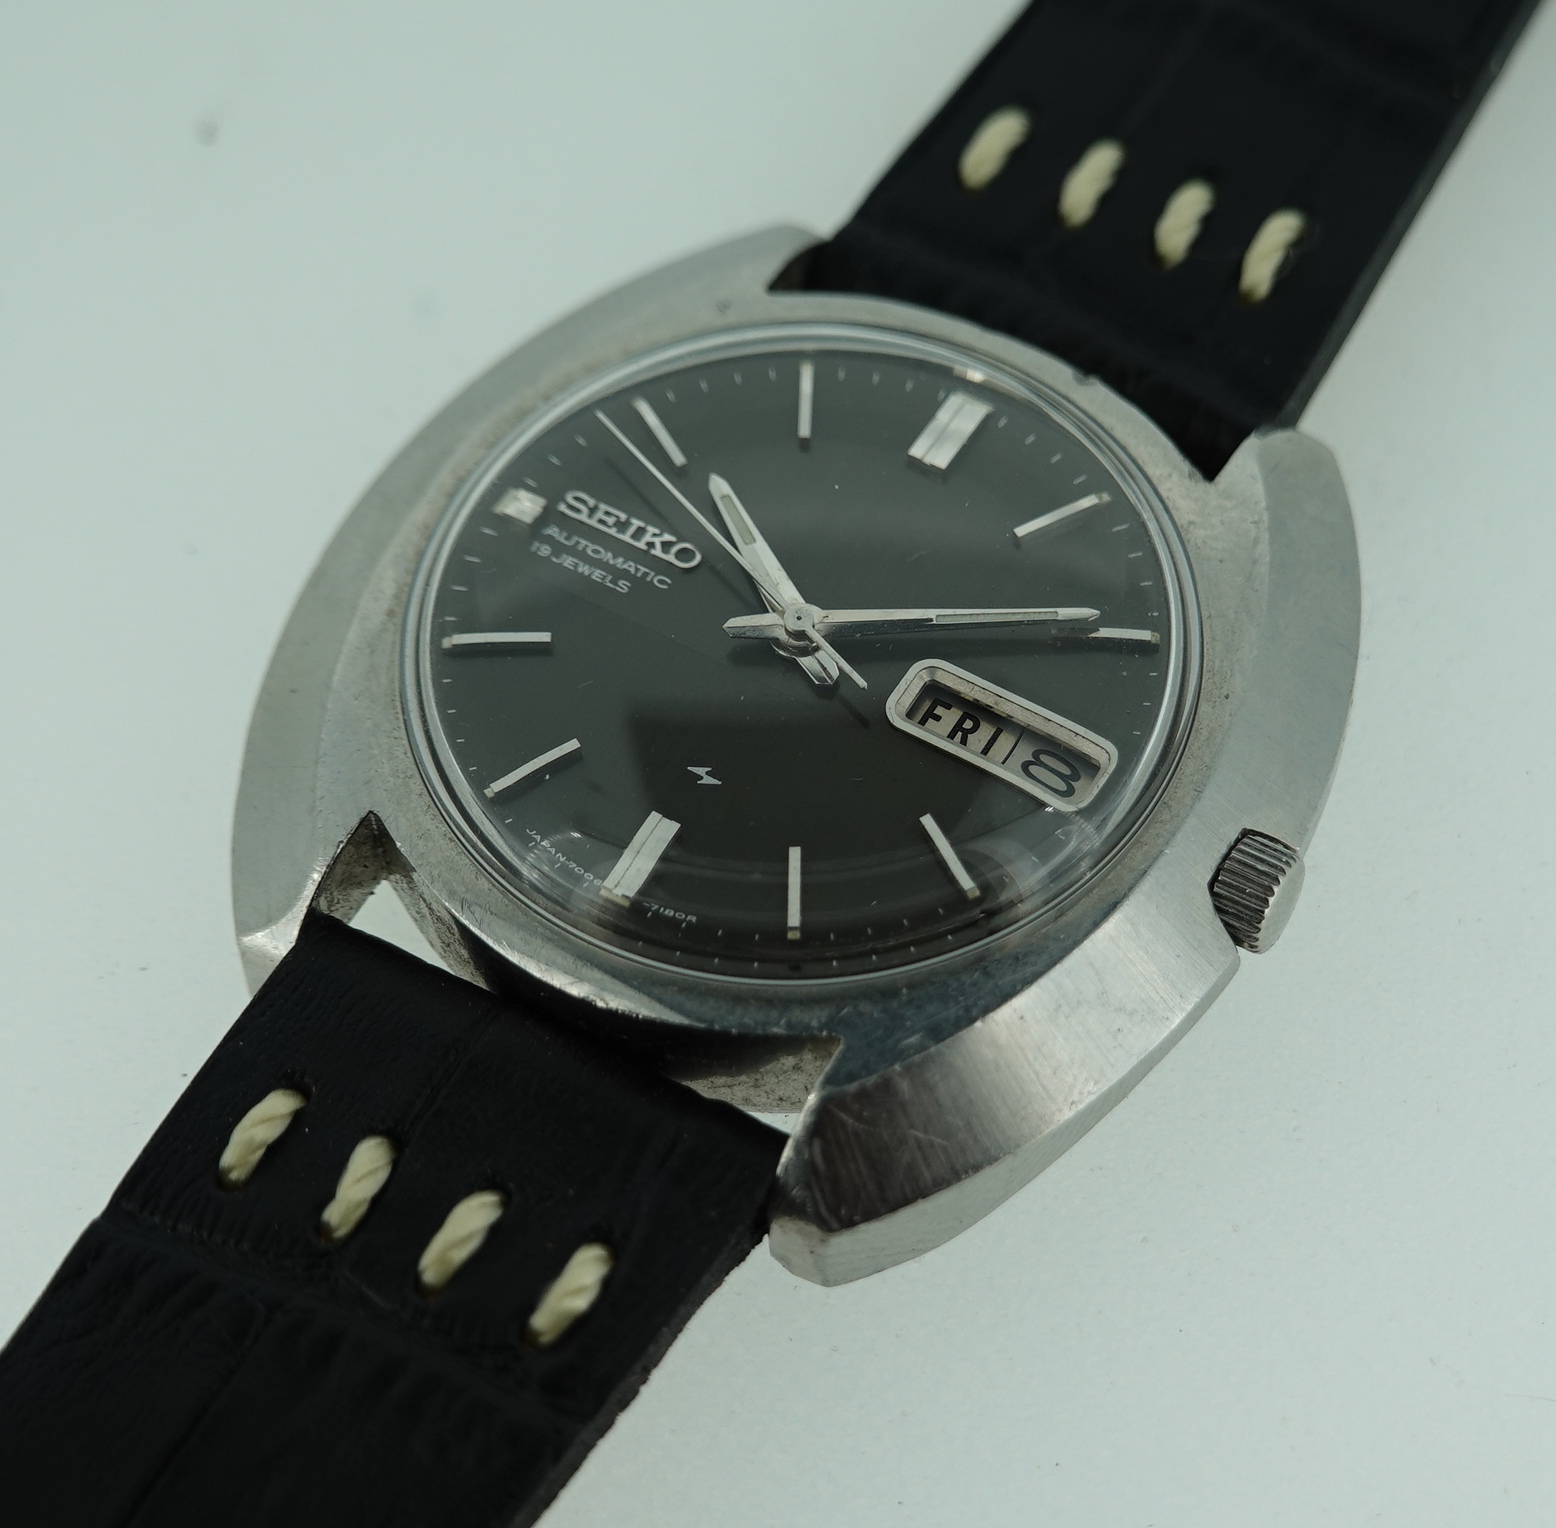 SOLD 1972 Seiko Automatic 7006-7080 - Birth Year Watches